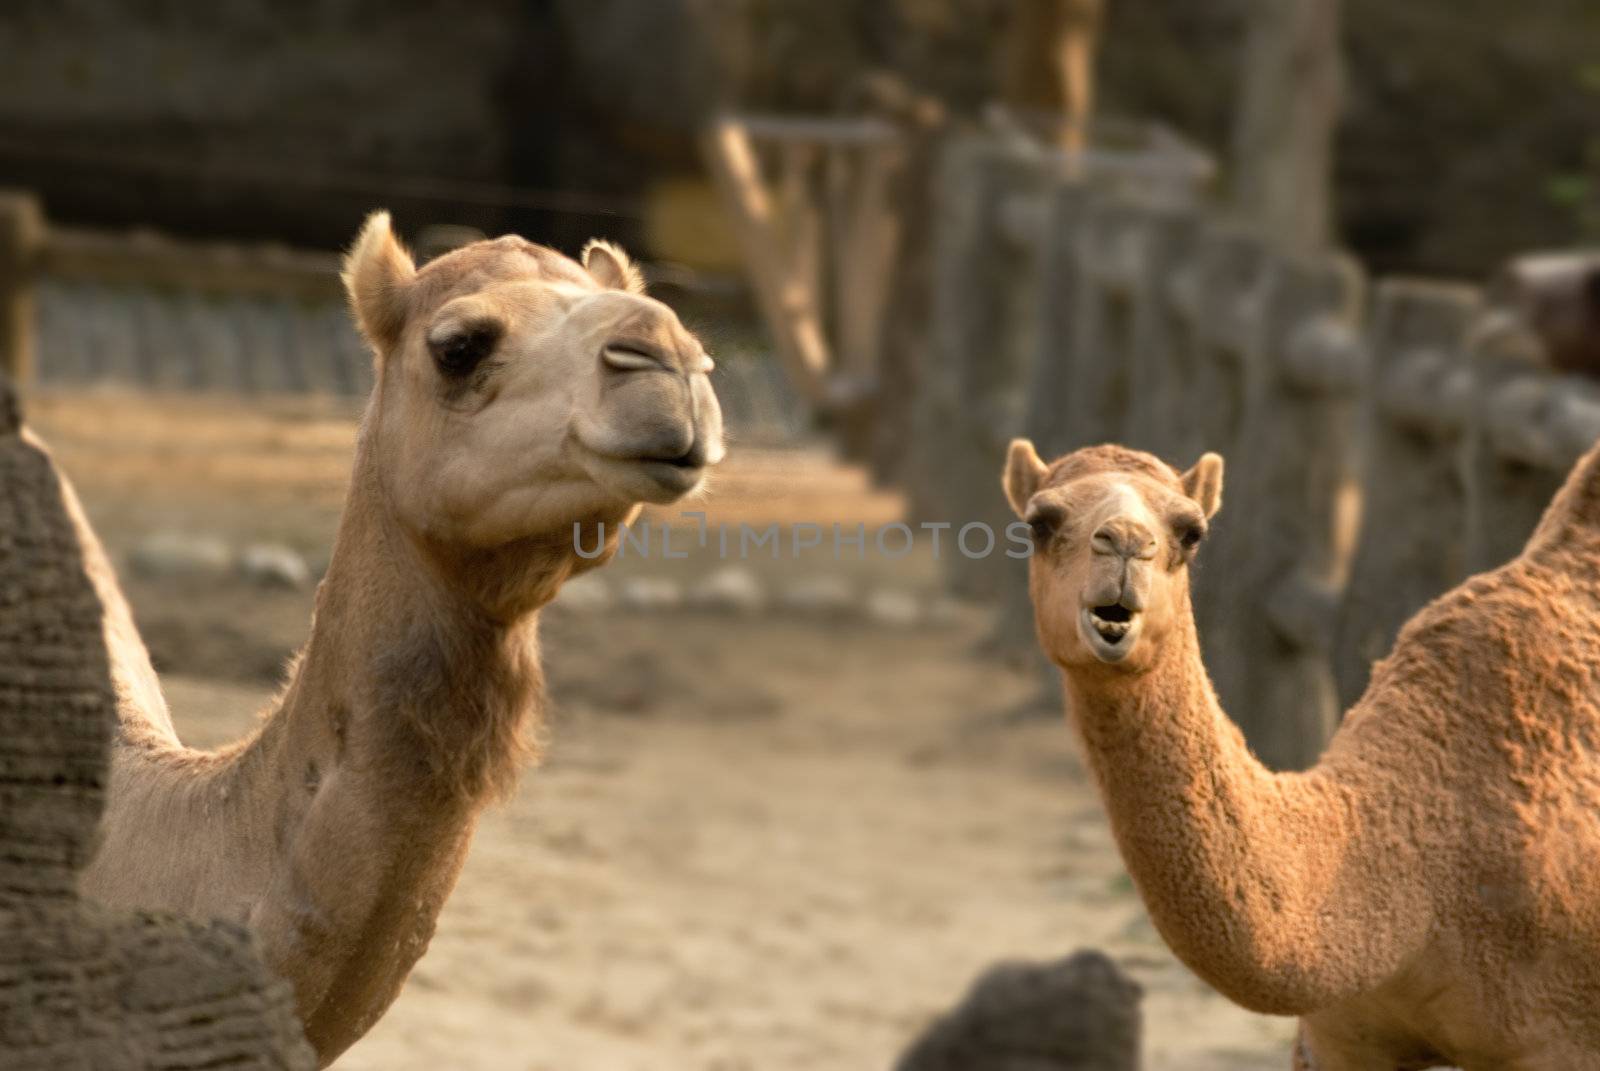 Couple of Camels by elwynn